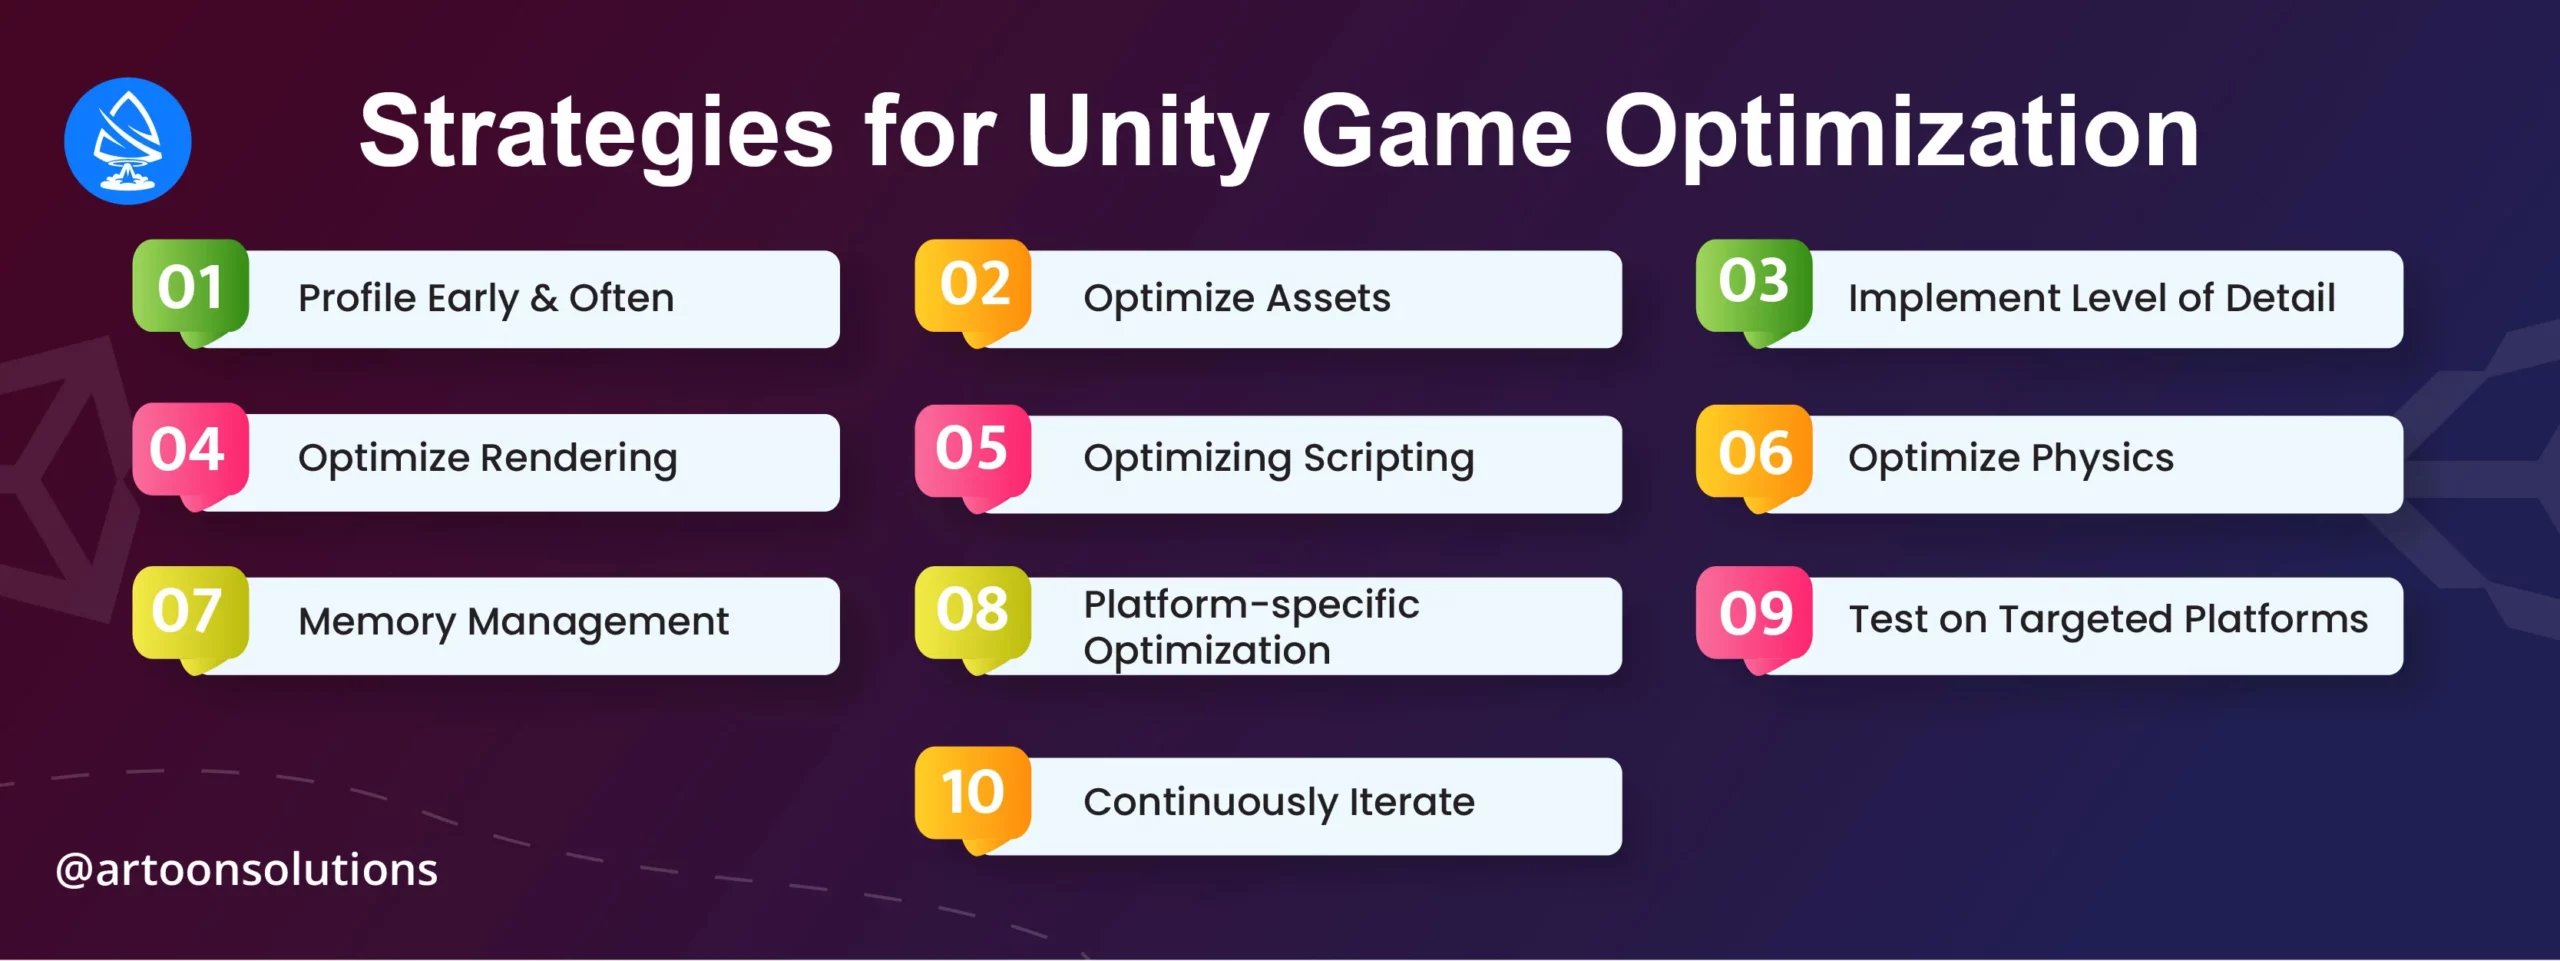 Strategies for Unity Game Optimization